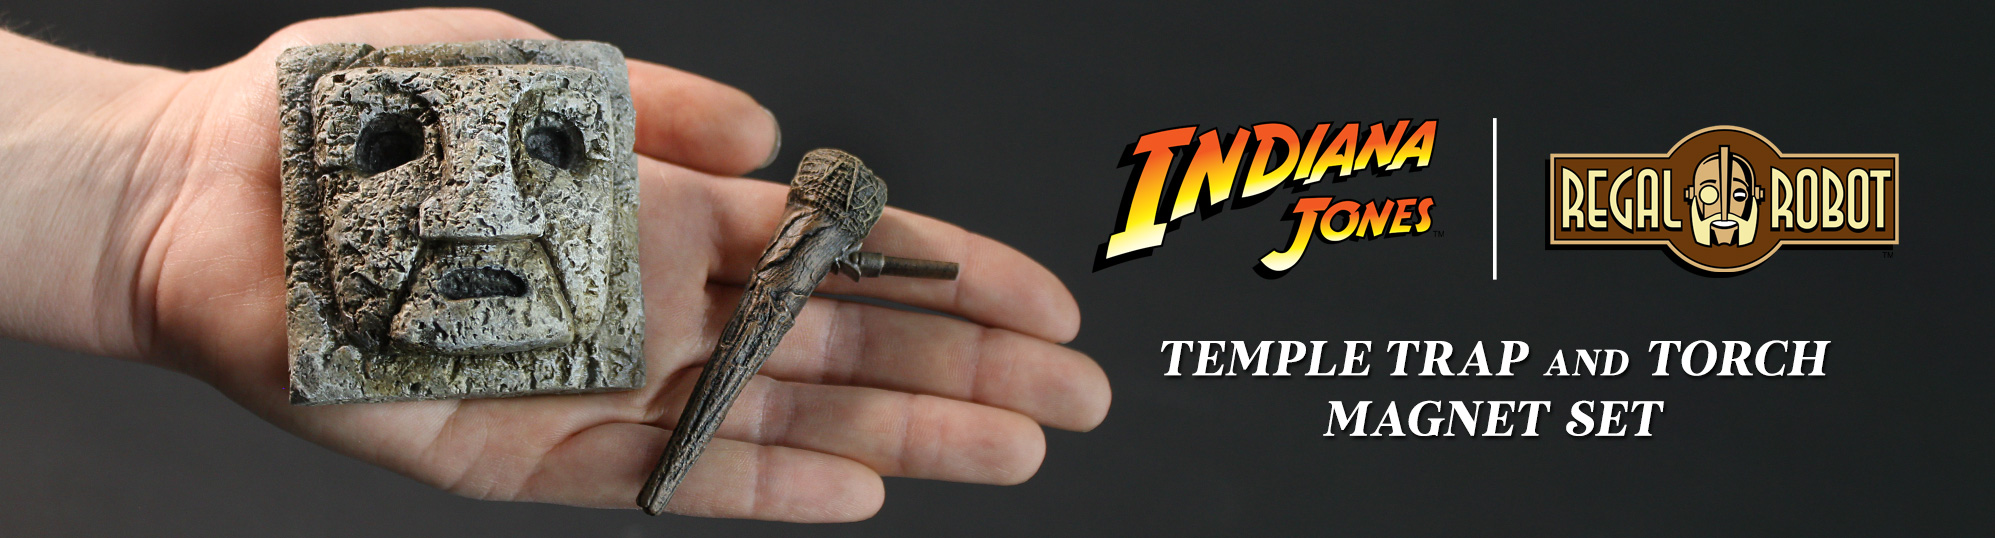 Indiana Jones Raiders of the Lost Ark Chachapoyan Temple booby traps